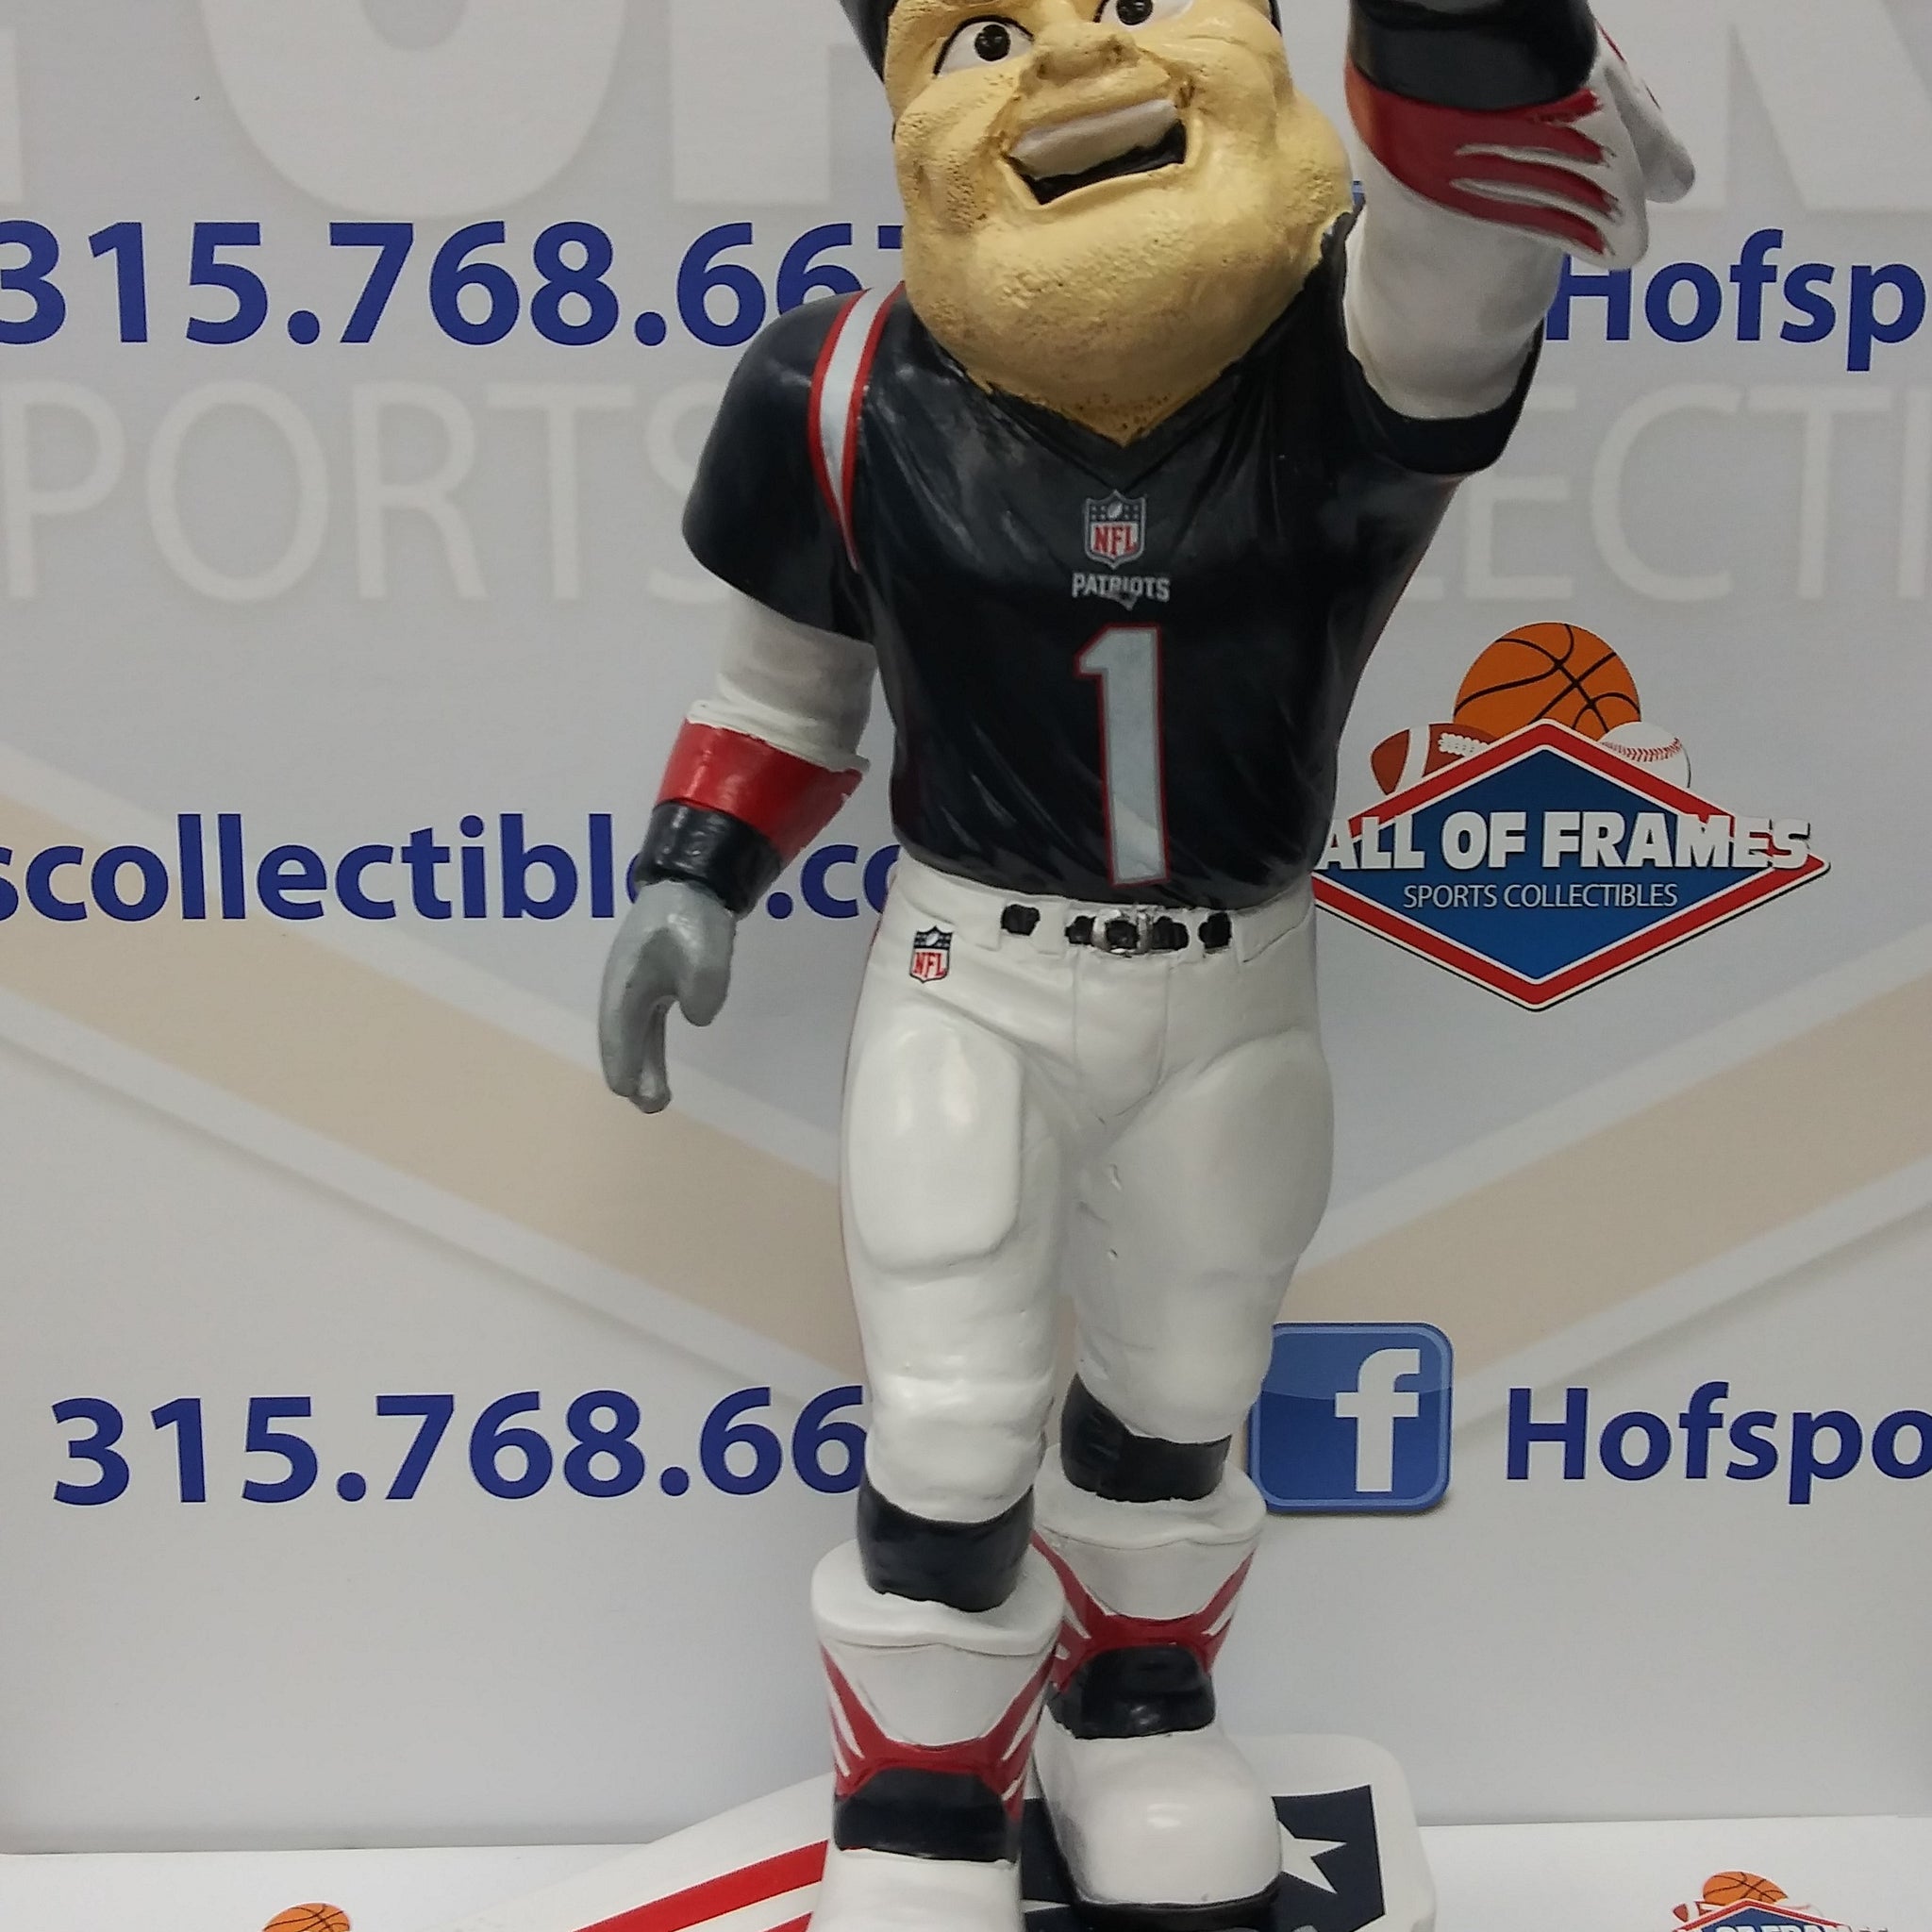 FOCO LIMITED EDITION HANDCRAFTED NEW ENGLAND PATRIOTS "PAT PATRIOT" MASCOT STATUE!